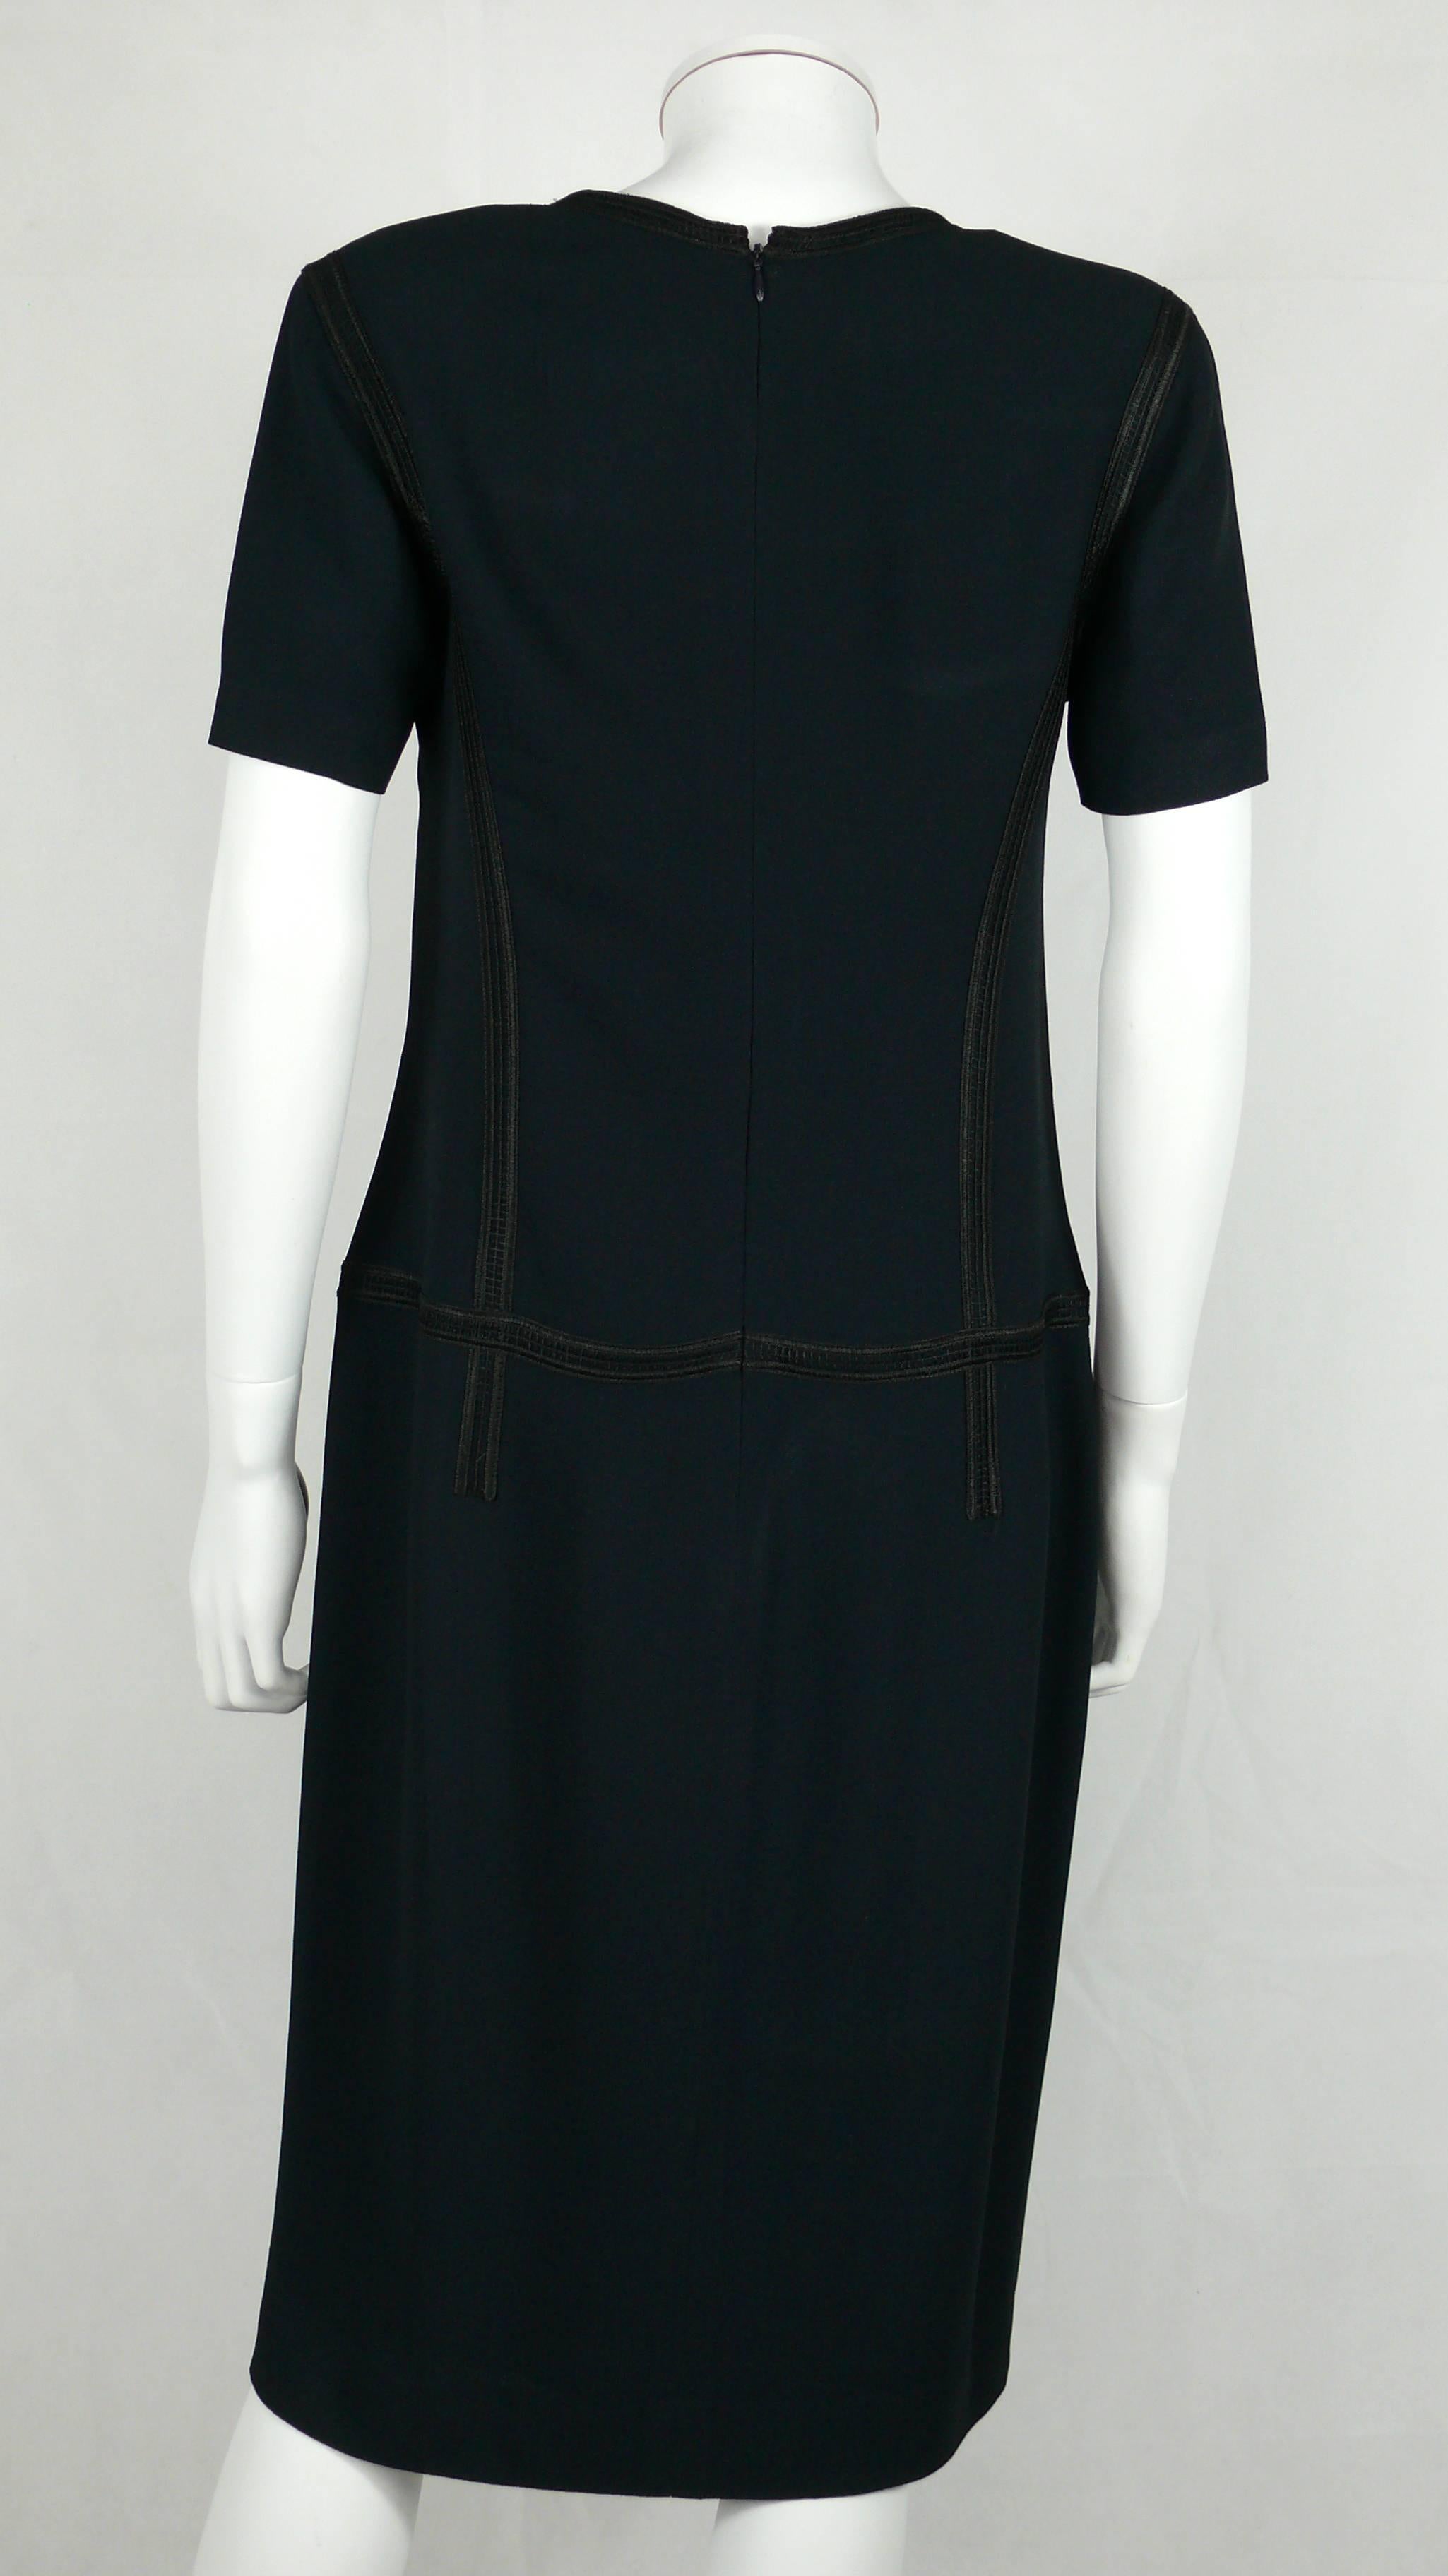 Black Chanel 2002 Cruise Collection Navy Asymmetric Dress For Sale